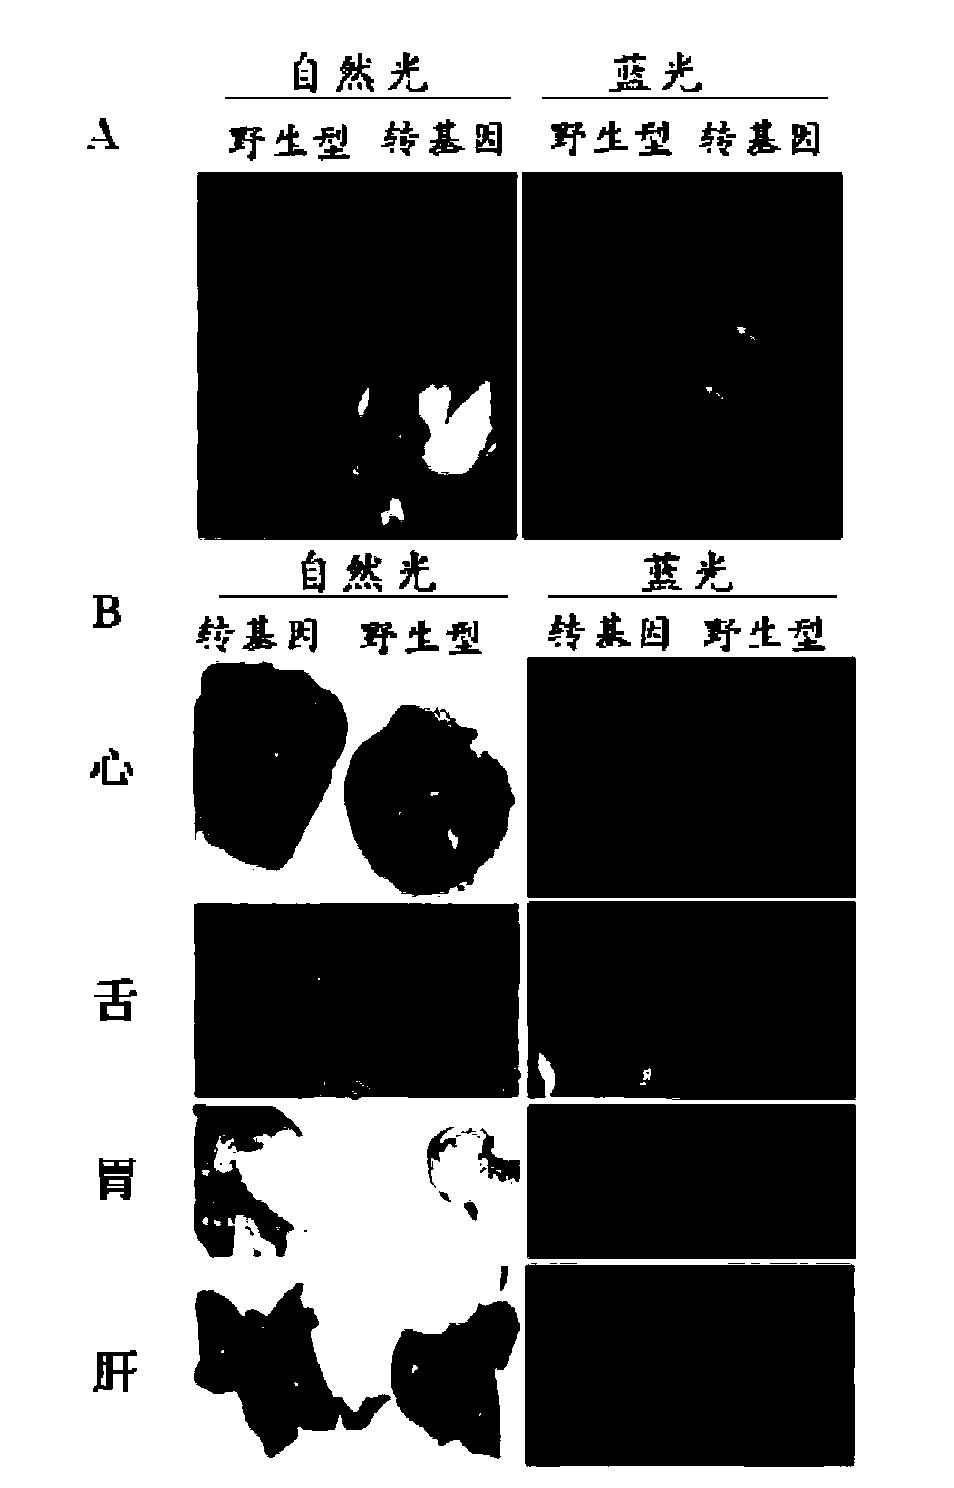 Expression vector for piggyBac transposon, and transgenic pig and construction method thereof